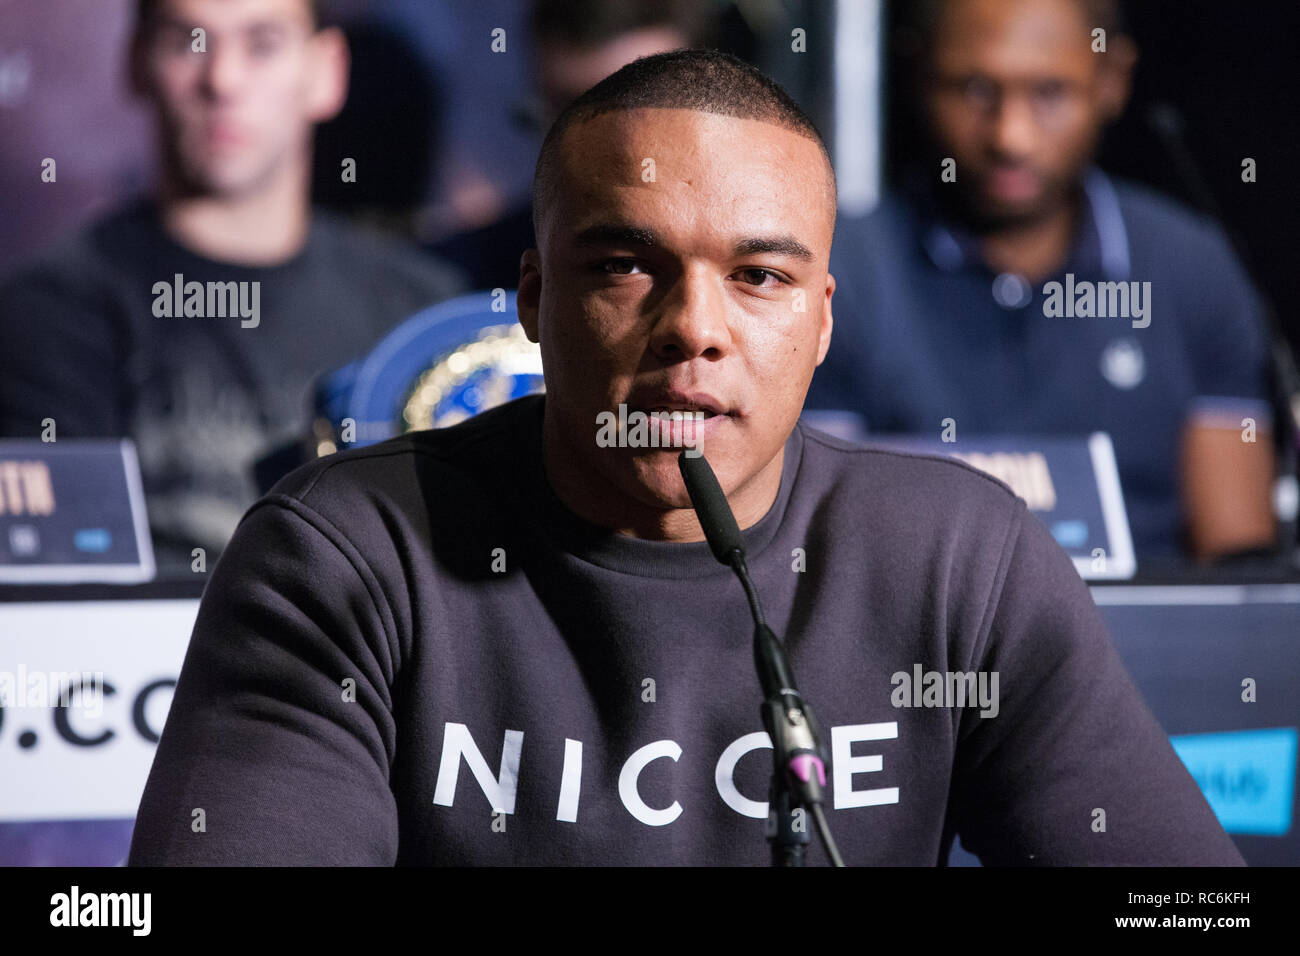 London, UK. 14th January, 2019. Ipswich heavyweight prospect Fabio Wardley appears at the press conference for a Matchroom Boxing card at the 02 on 2nd February headed by a European Super-Welterweight Championship fight between Sergio Garcia and Ted Cheeseman. Credit: Mark Kerrison/Alamy Live News  Stock Photo